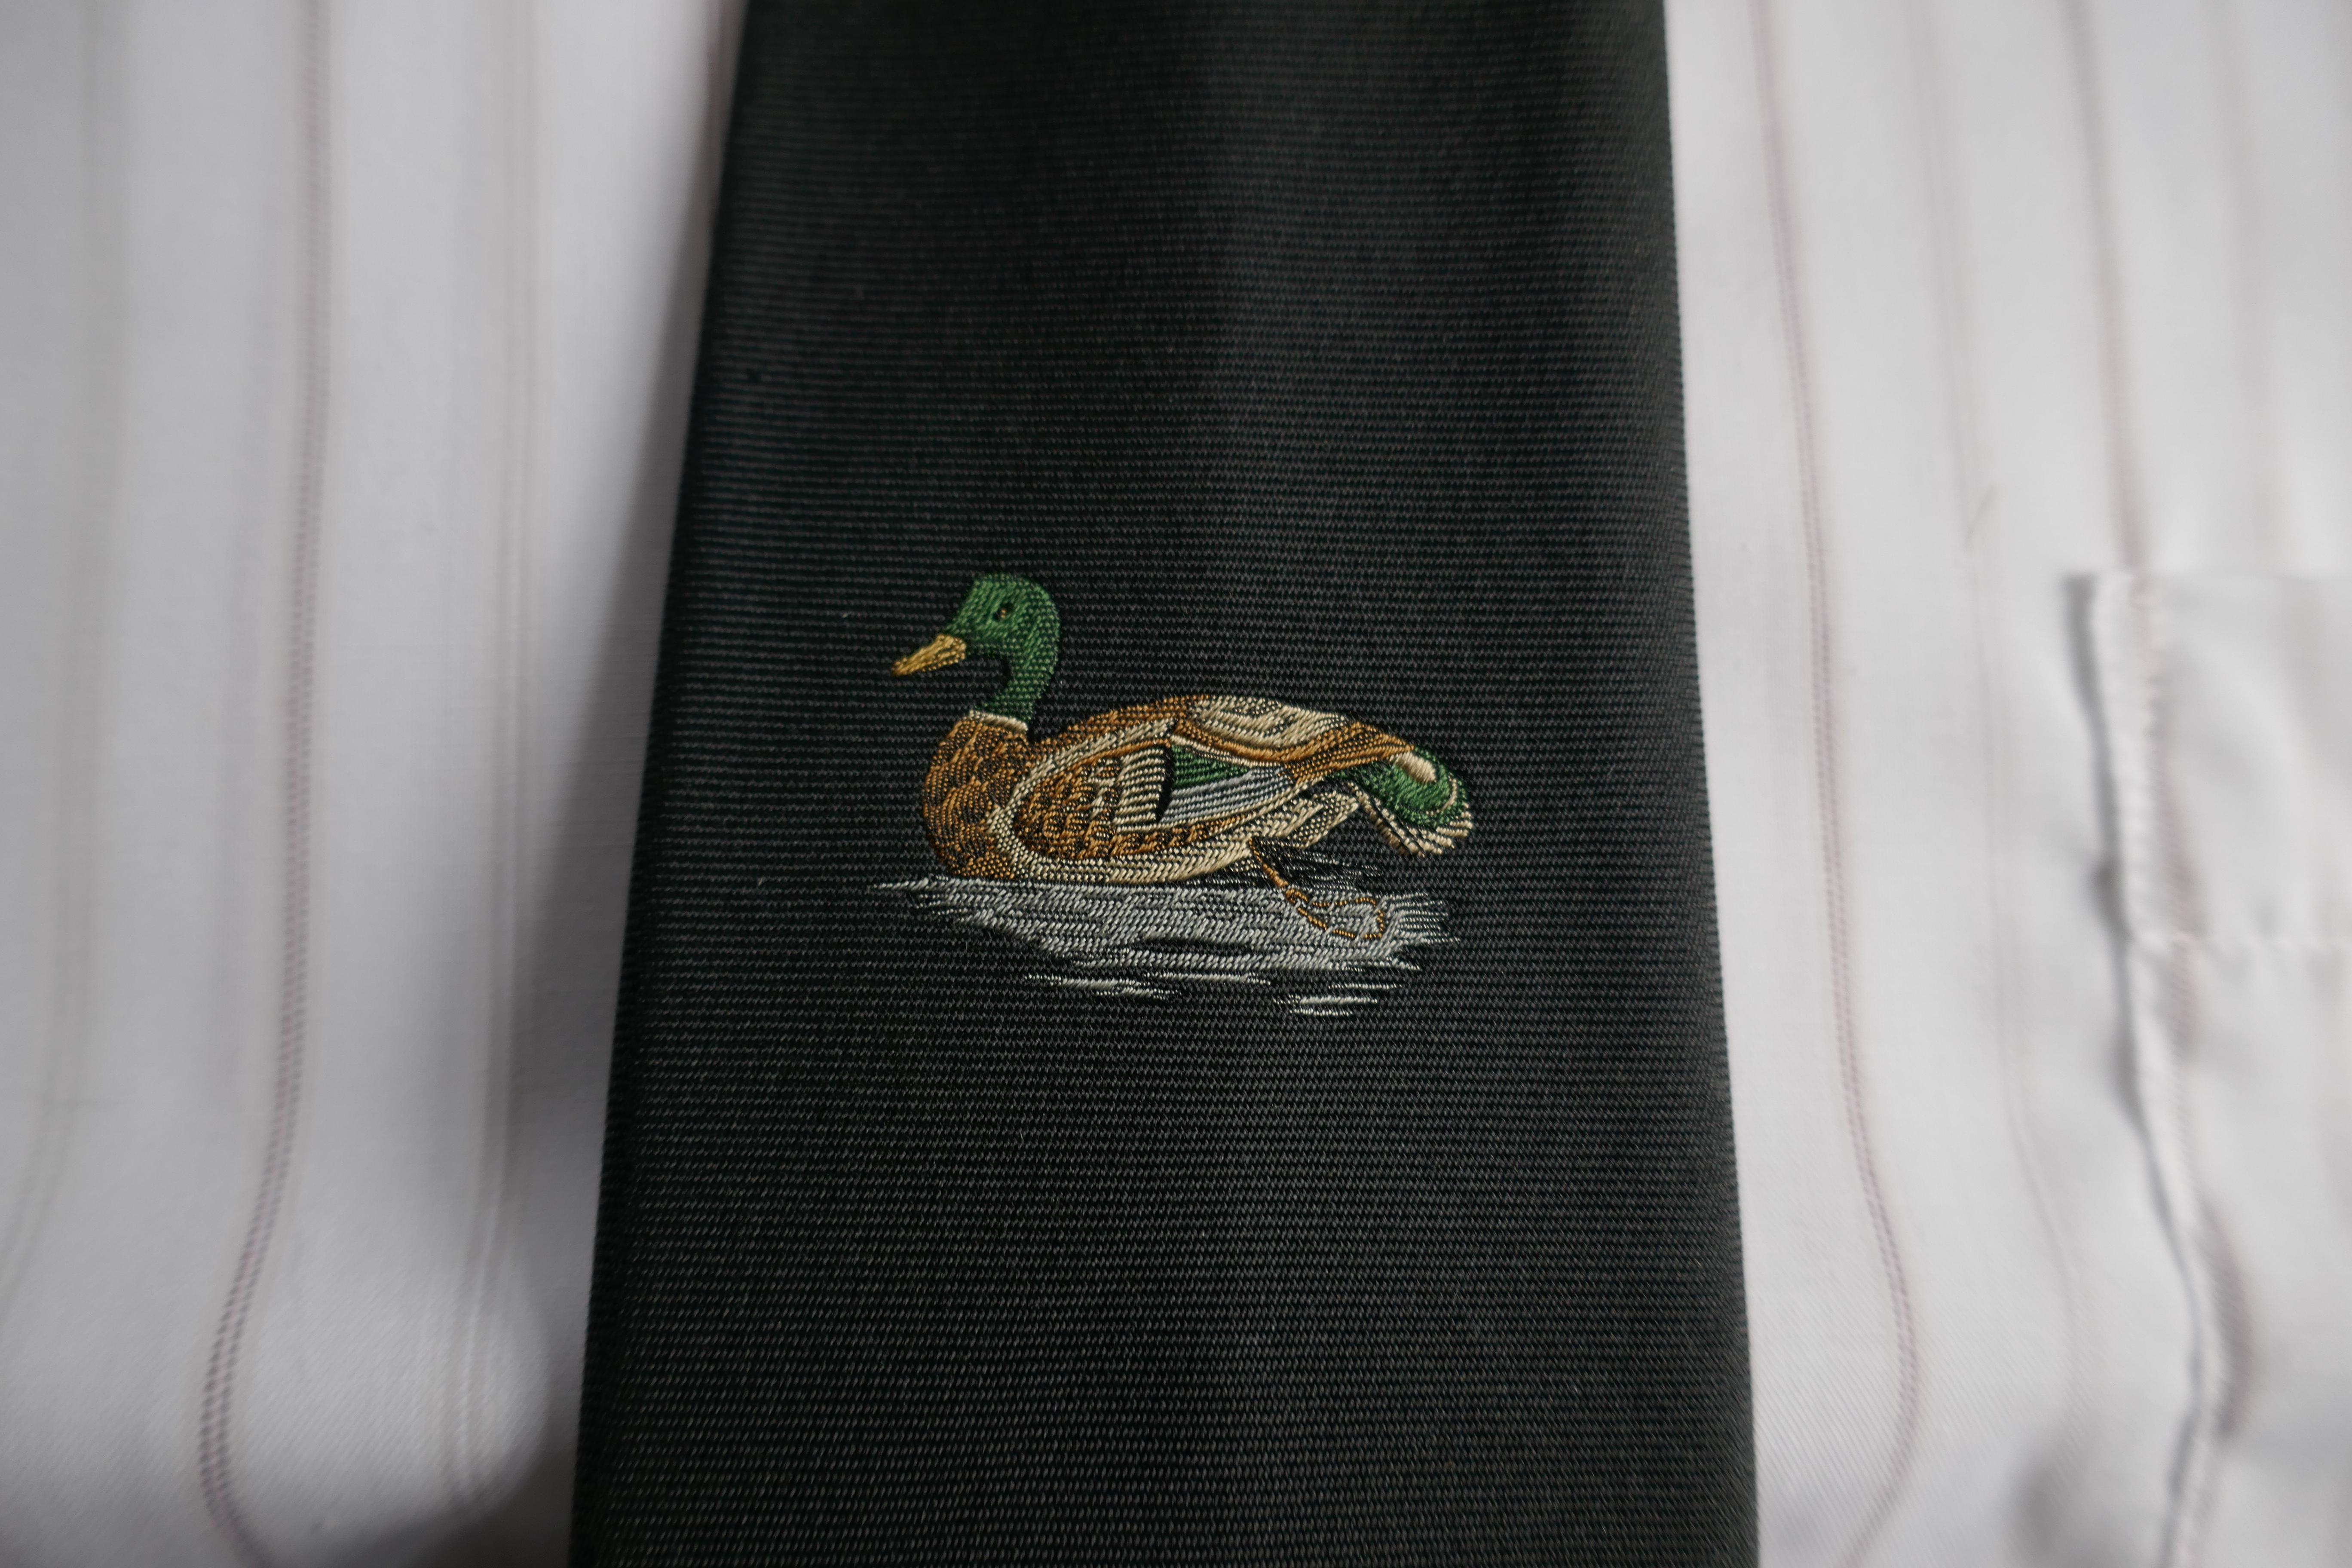 Elegant Hermes Black Silk Tie, Lone Mallard in the Reeds 

Classic Hermes Black Silk Tie with a fine embroidery of a swimming duck 
Superb Tie is lined with H H silk fabric
A Very Special tie, instantly recognisable as Hermes by those in the